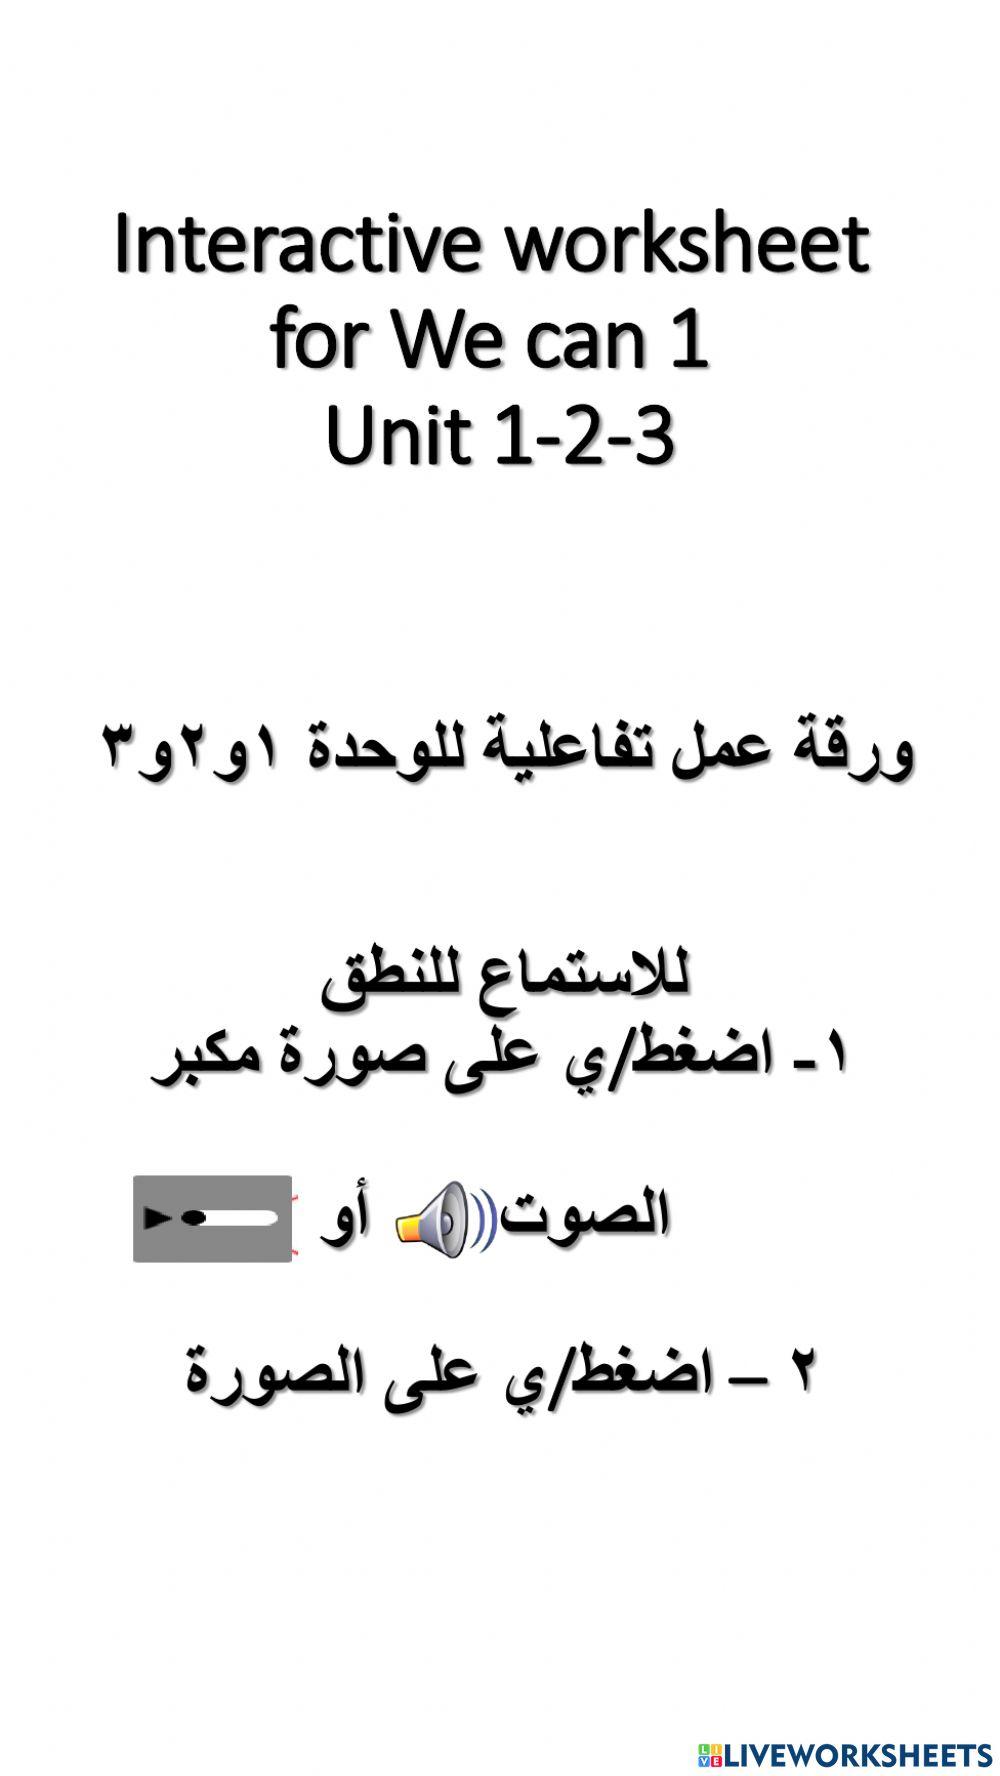 We can 1 revision u123